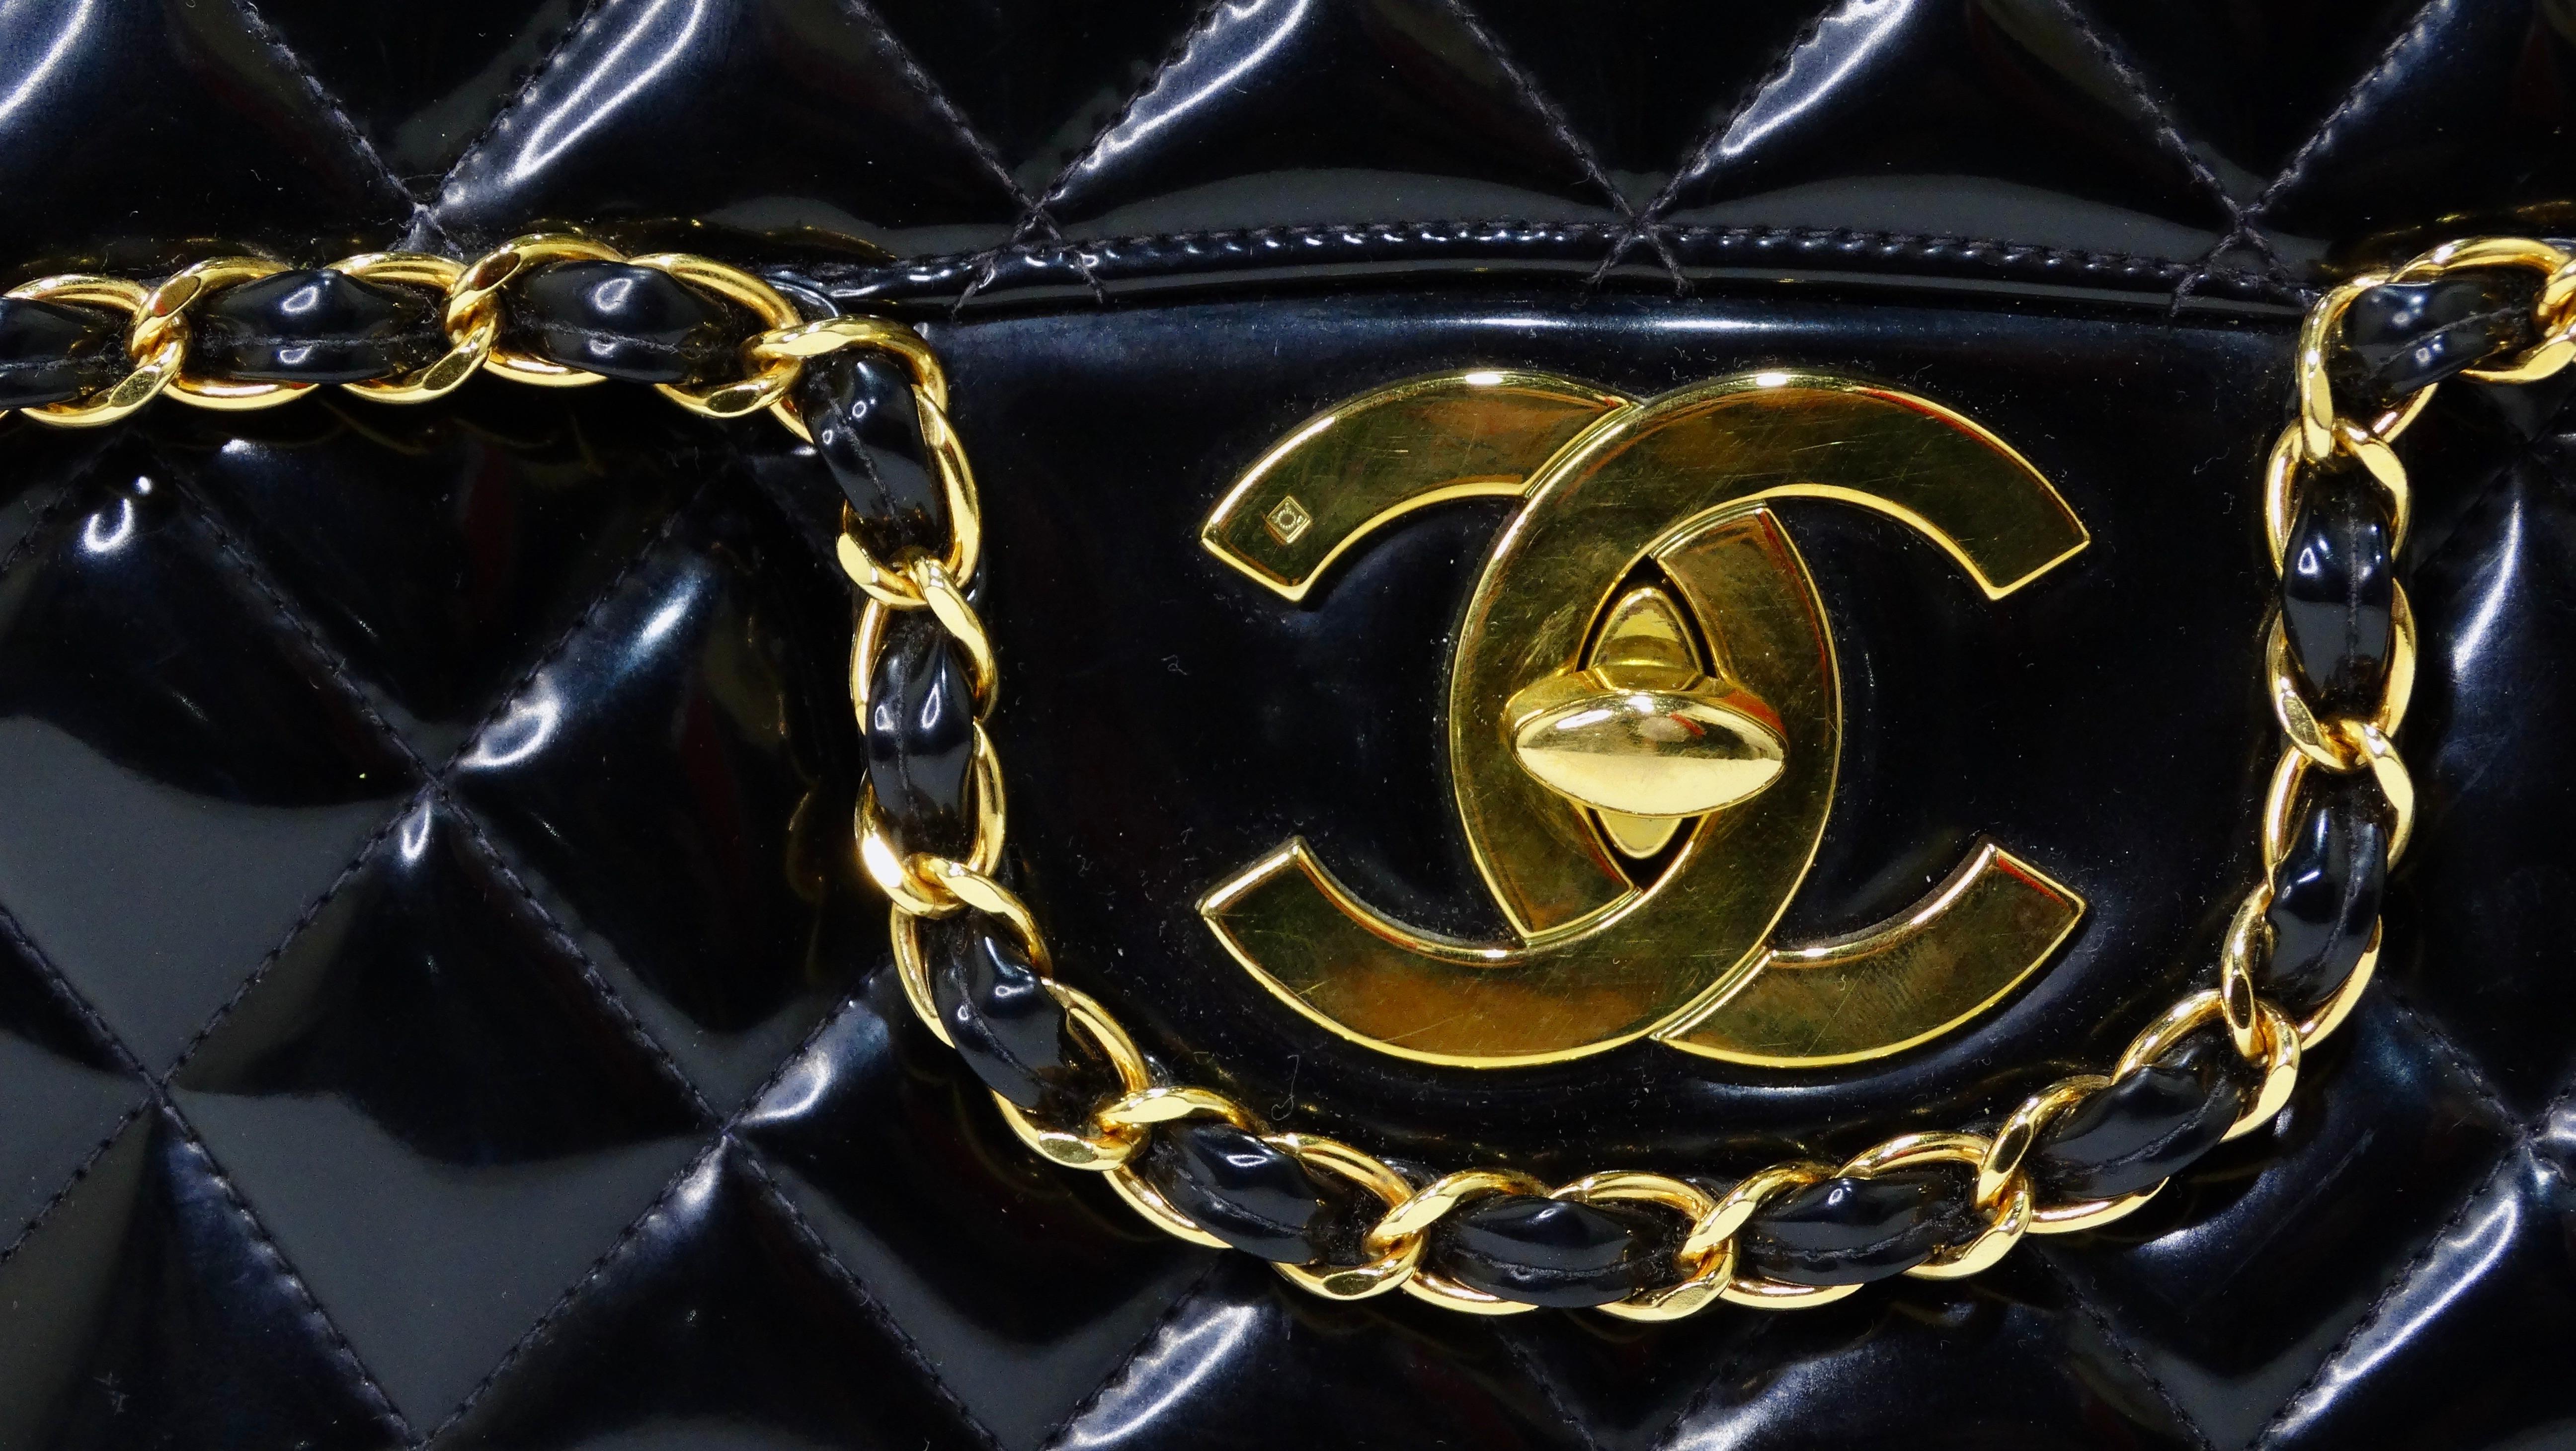 This is one of the most unique and rare handbags from the house of Chanel! Don't miss out on the chance to have a piece of Chanel history with this gem from the 1990's. Everything is better vintage! The condition of this bag proves this. This is an